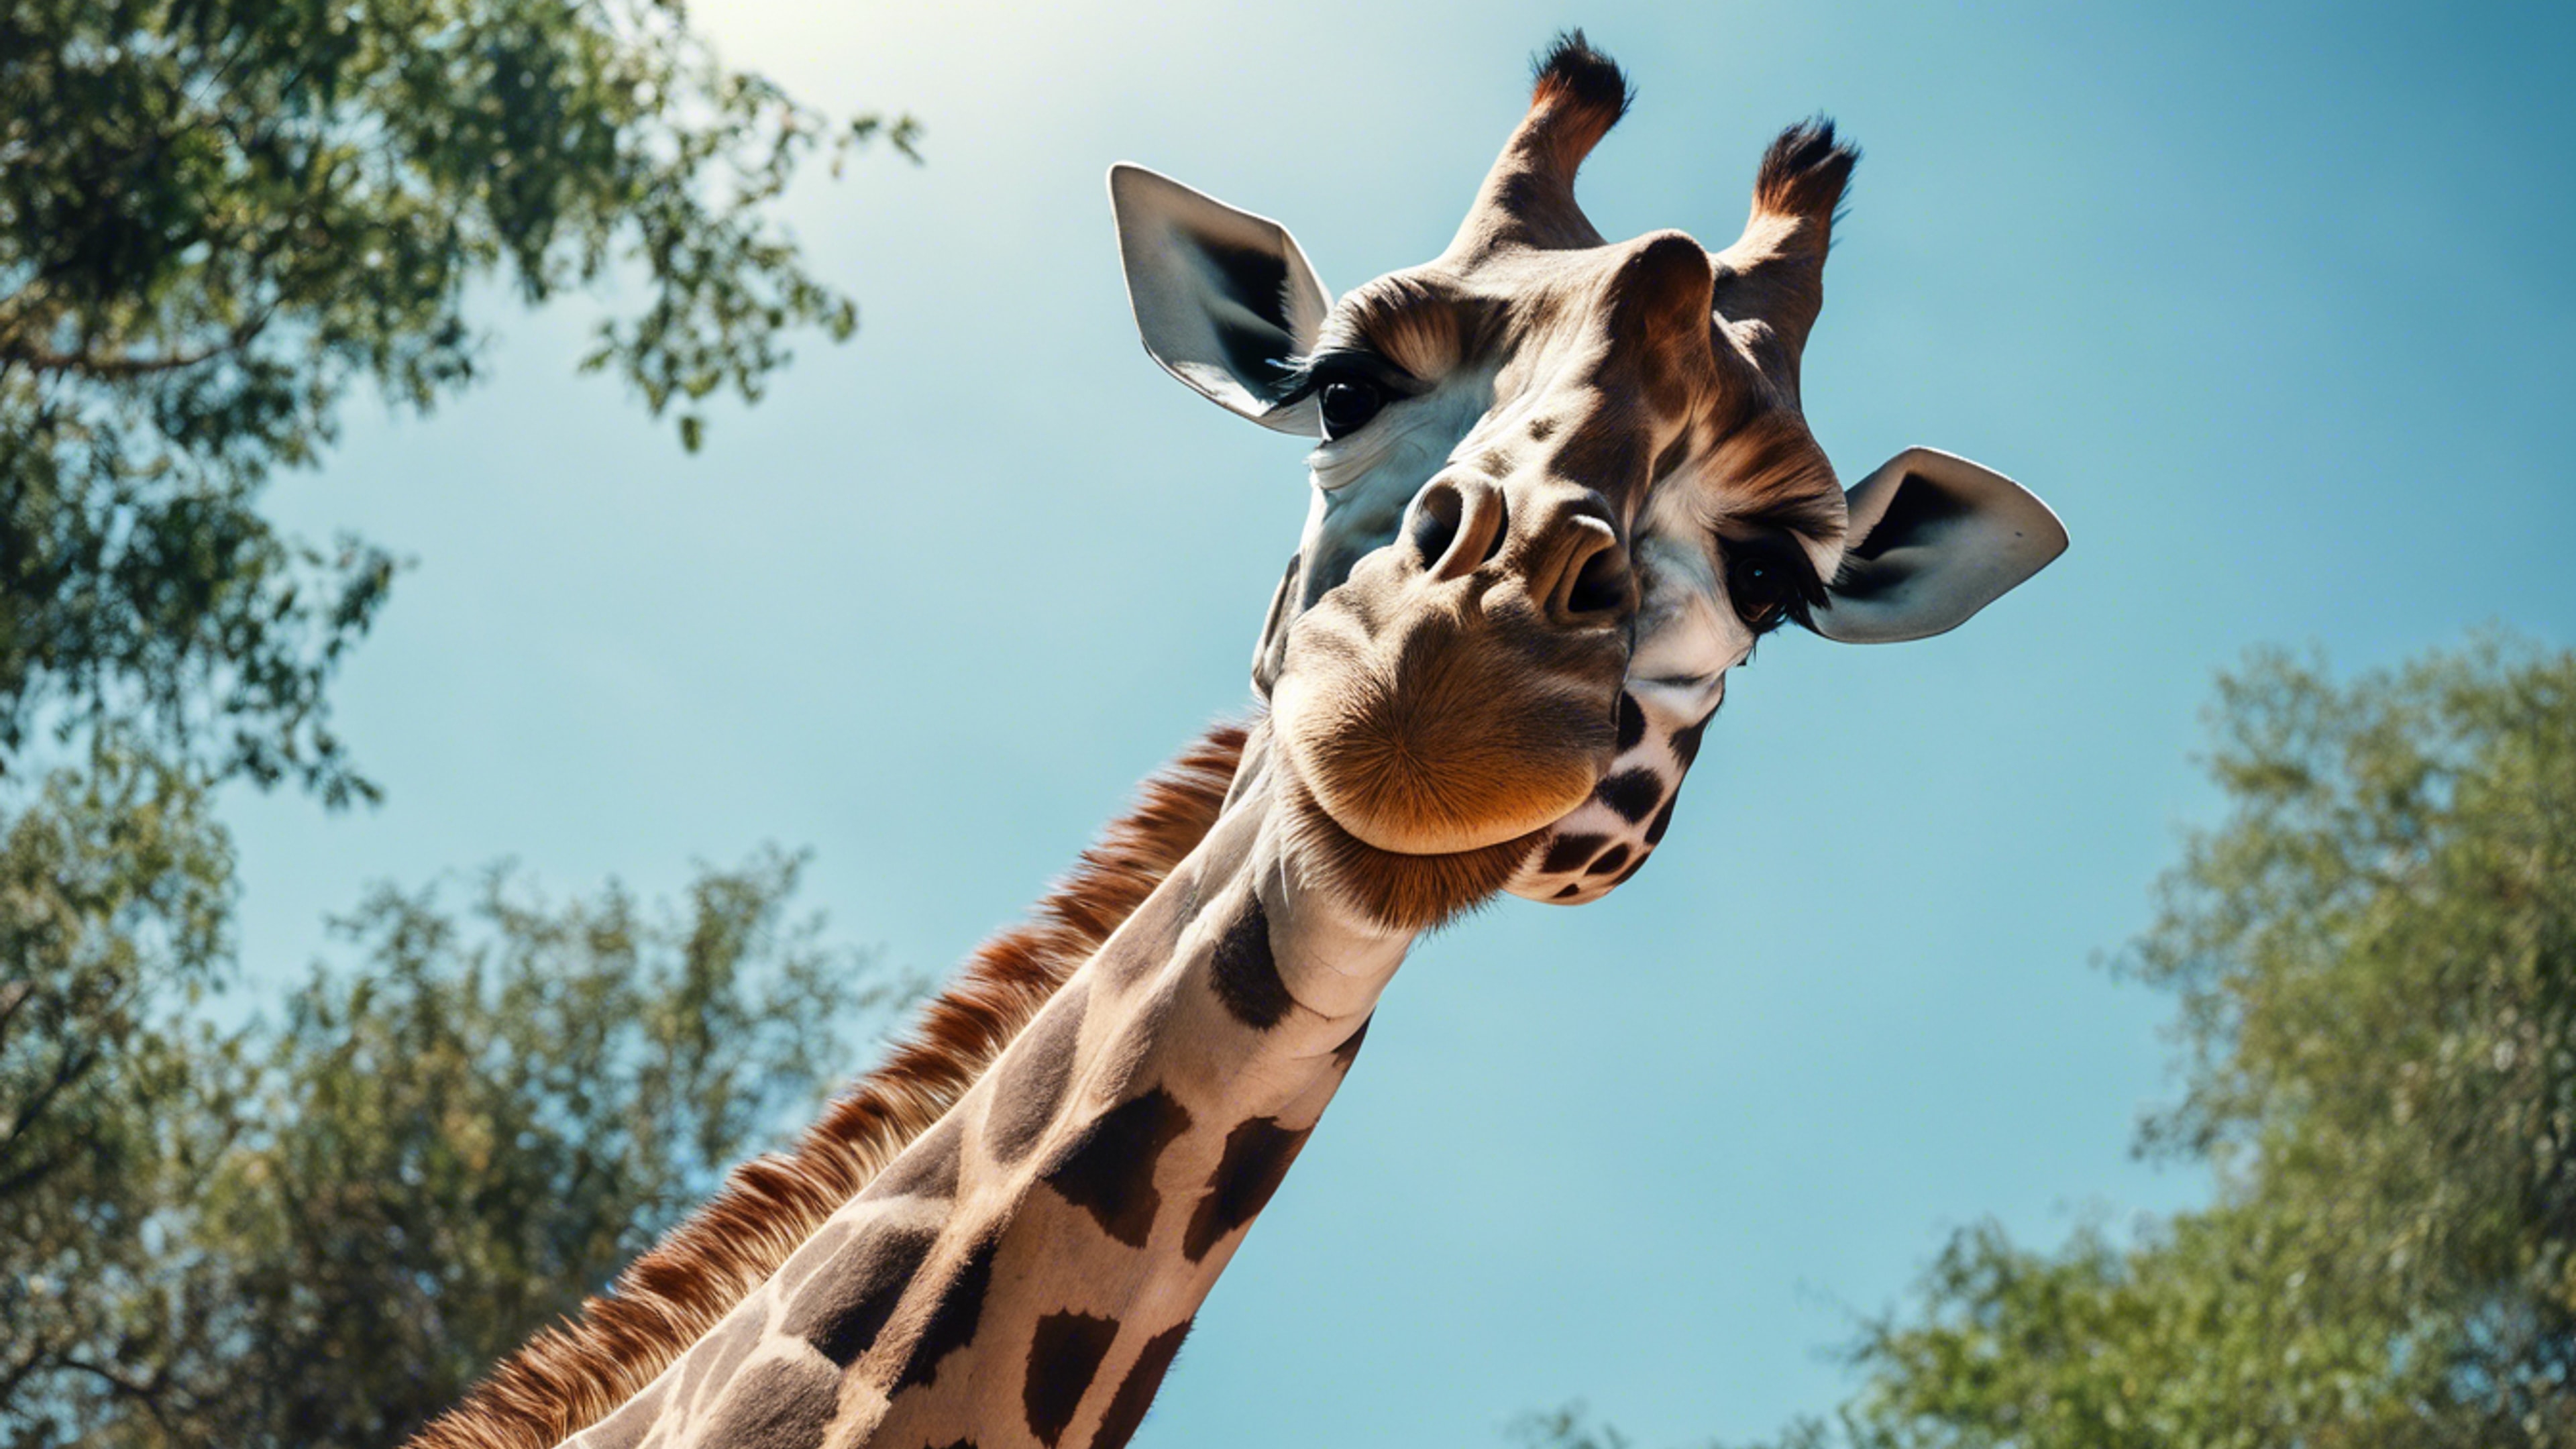 A picture from a below angle showing the towering magnificence of a giraffe against a clear blue sky. 墙纸[8a88956d9aa2483bb204]